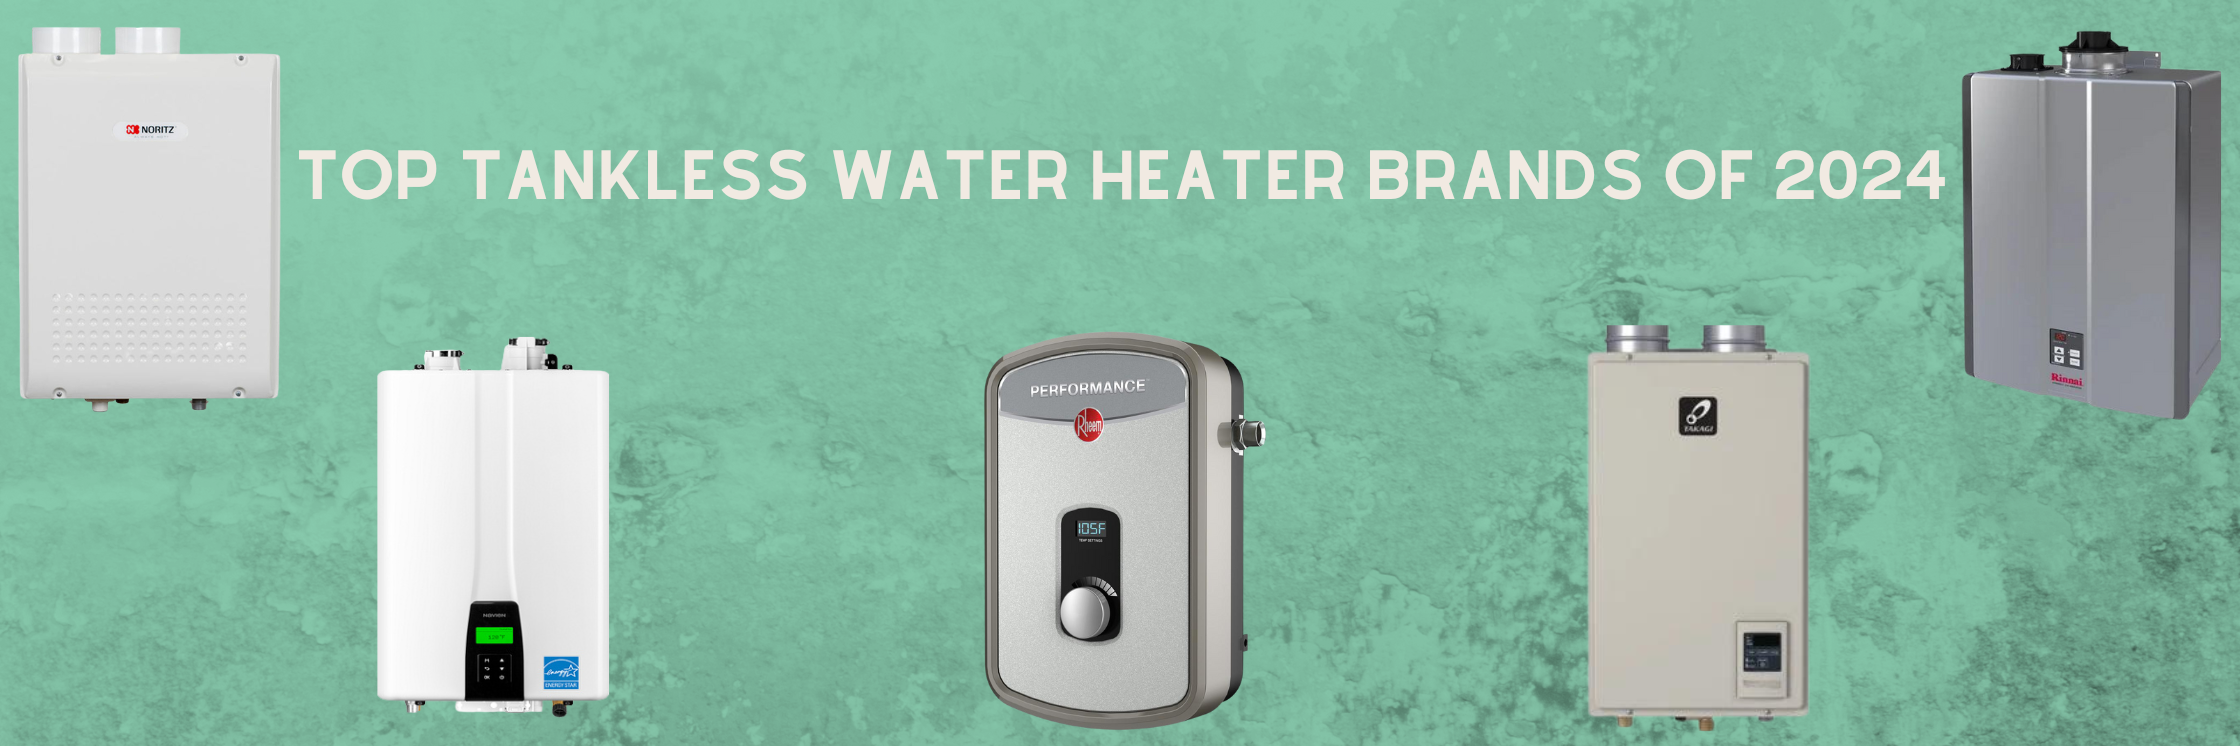 Top Tankless Water Heater Brands of 2024